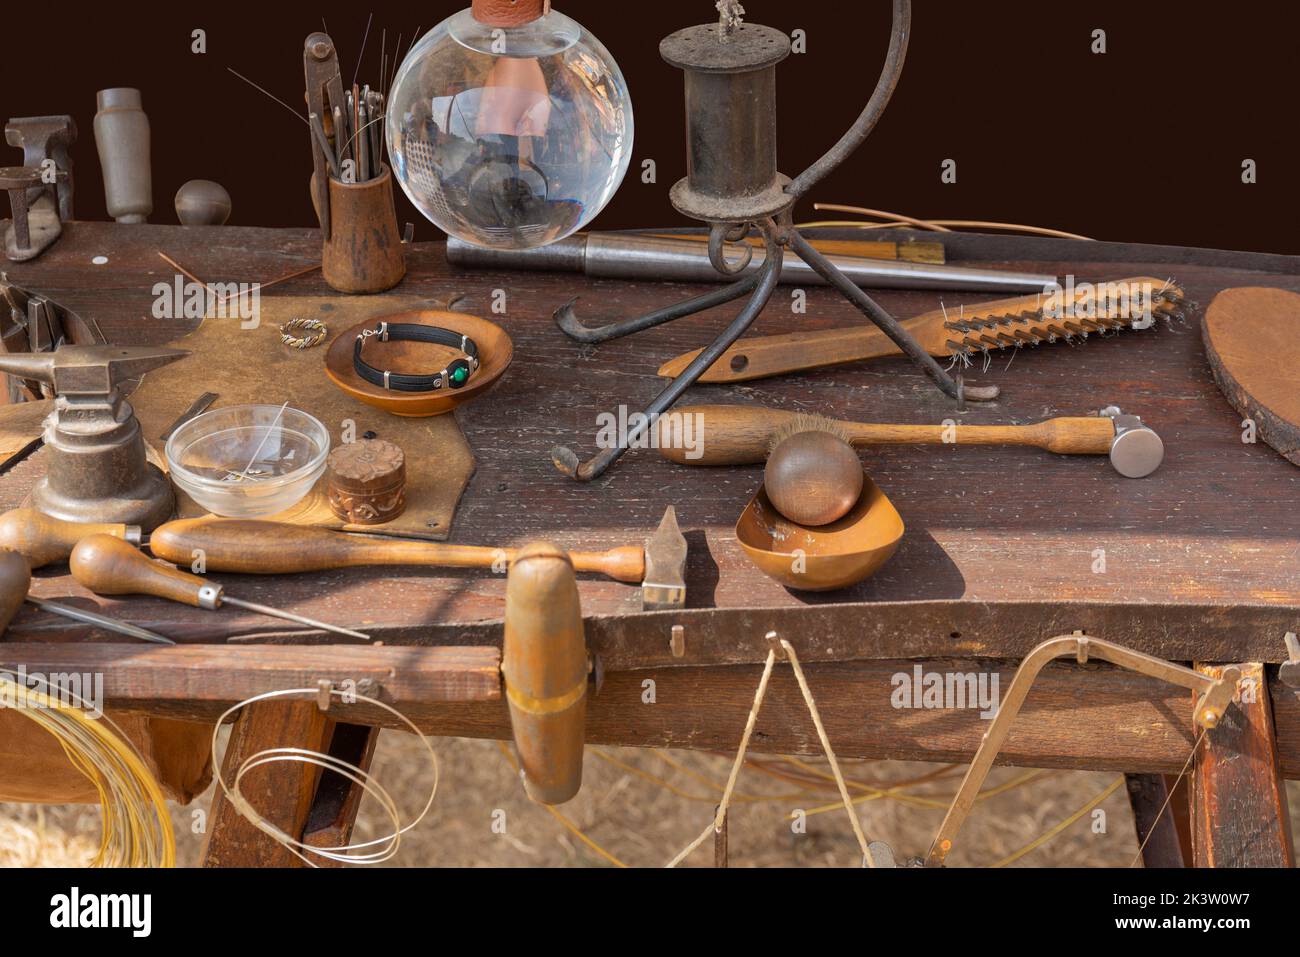 Lots of historic handcraft equipment on wooden table Stock Photo